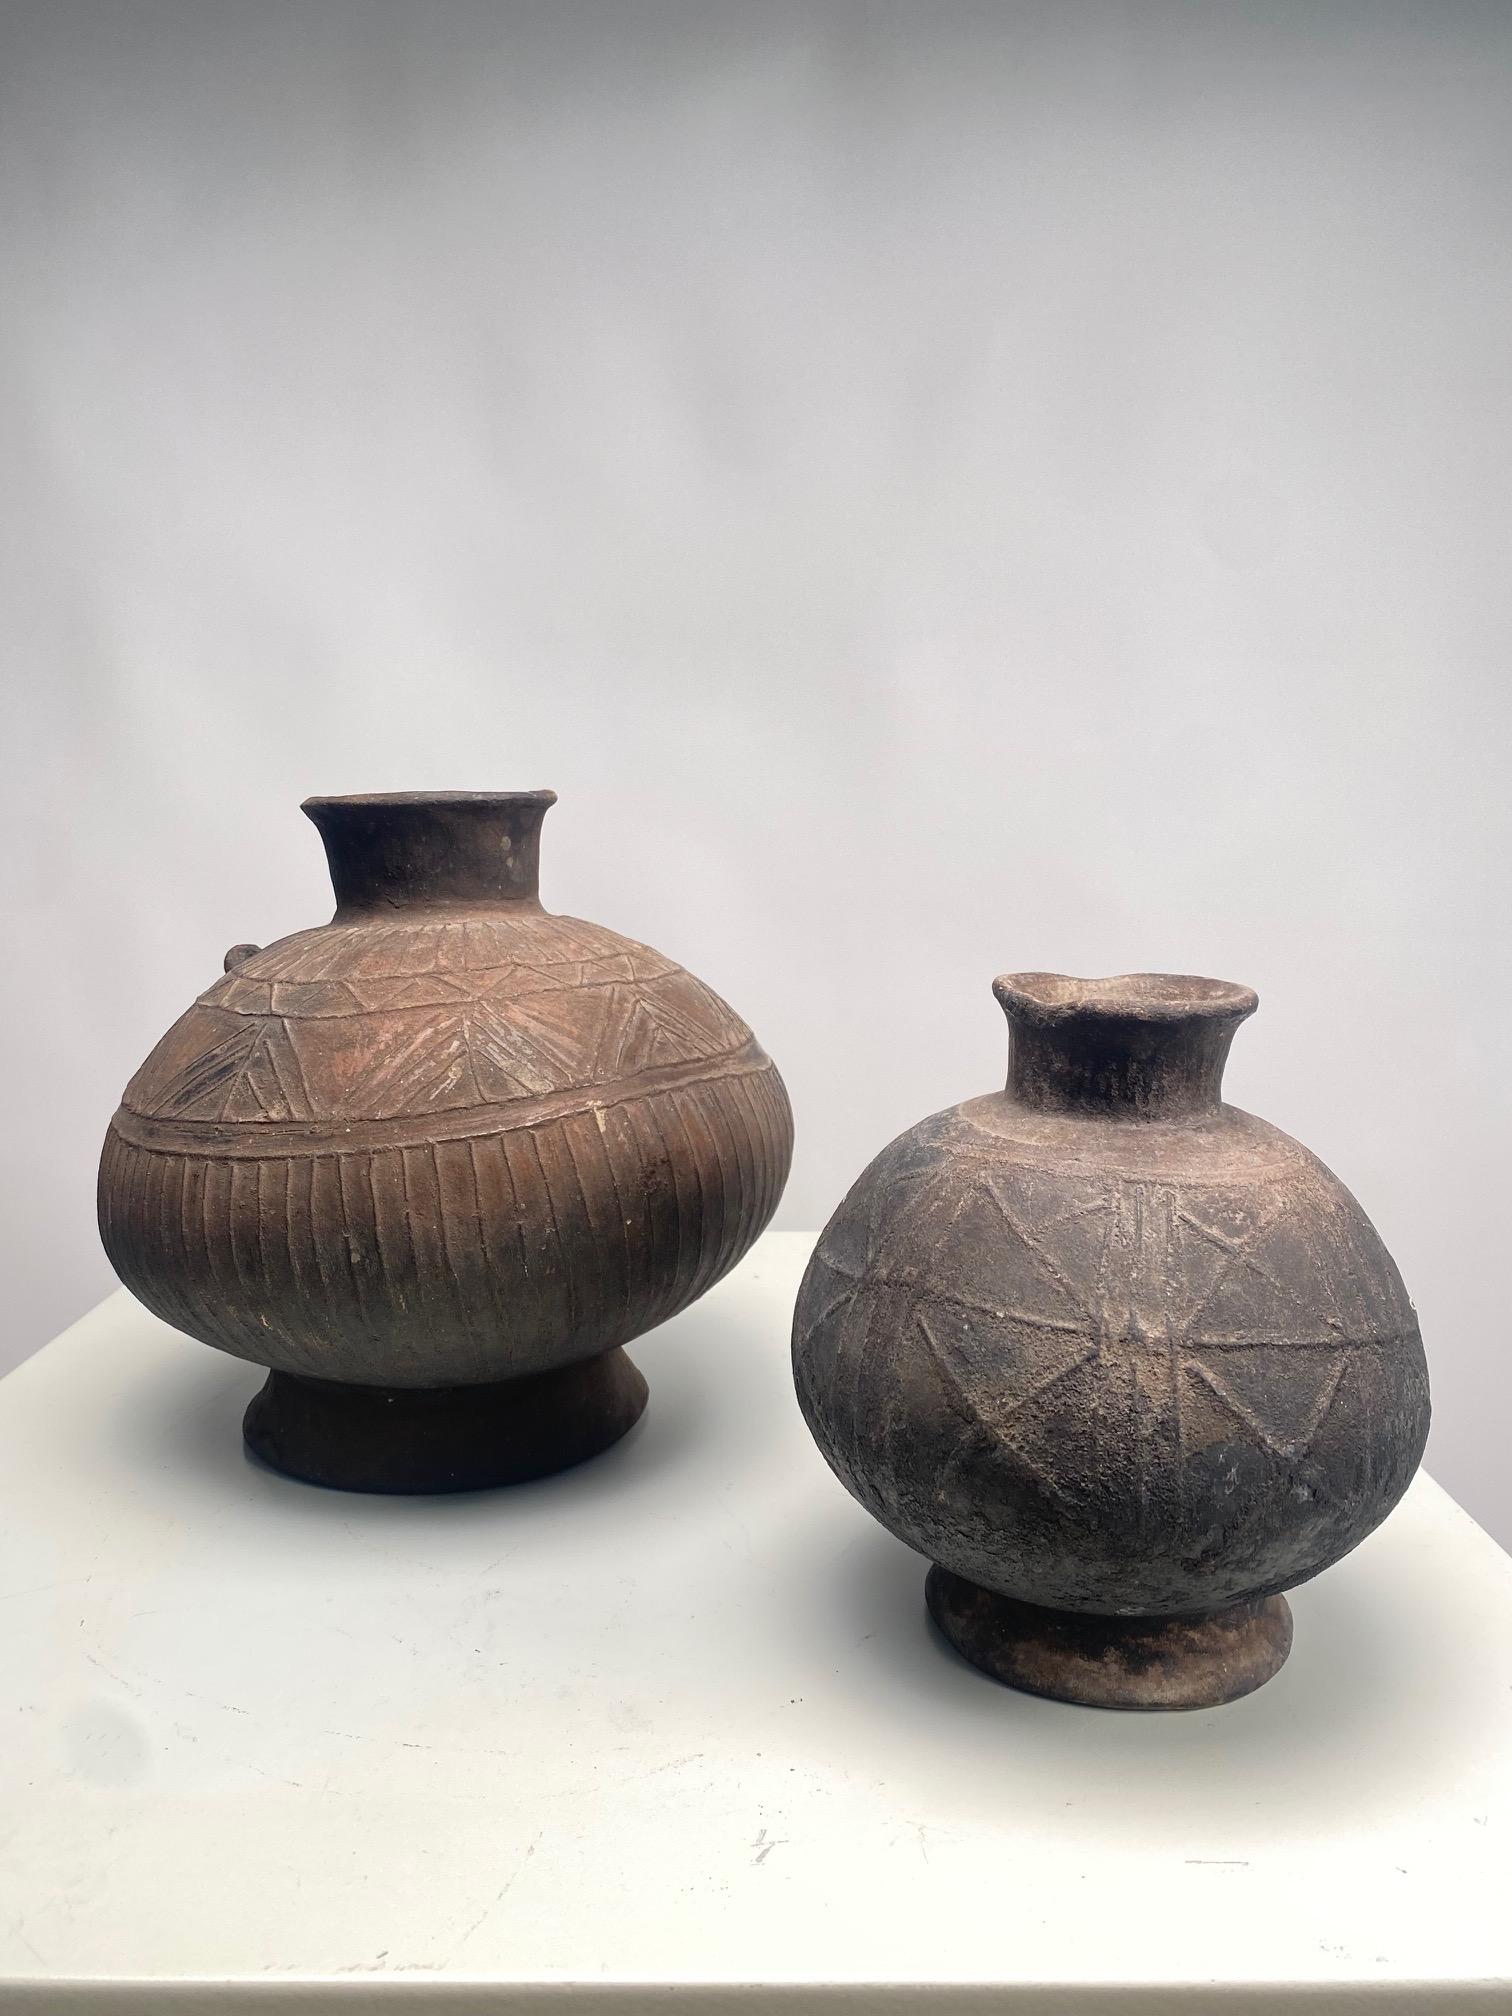 Set of two handmade African vases with geometric decorations

Magnificent set of two handmade African vases with geometric decorations
They are works of great refinement, capable of embellishing the most diverse domestic environments with taste and